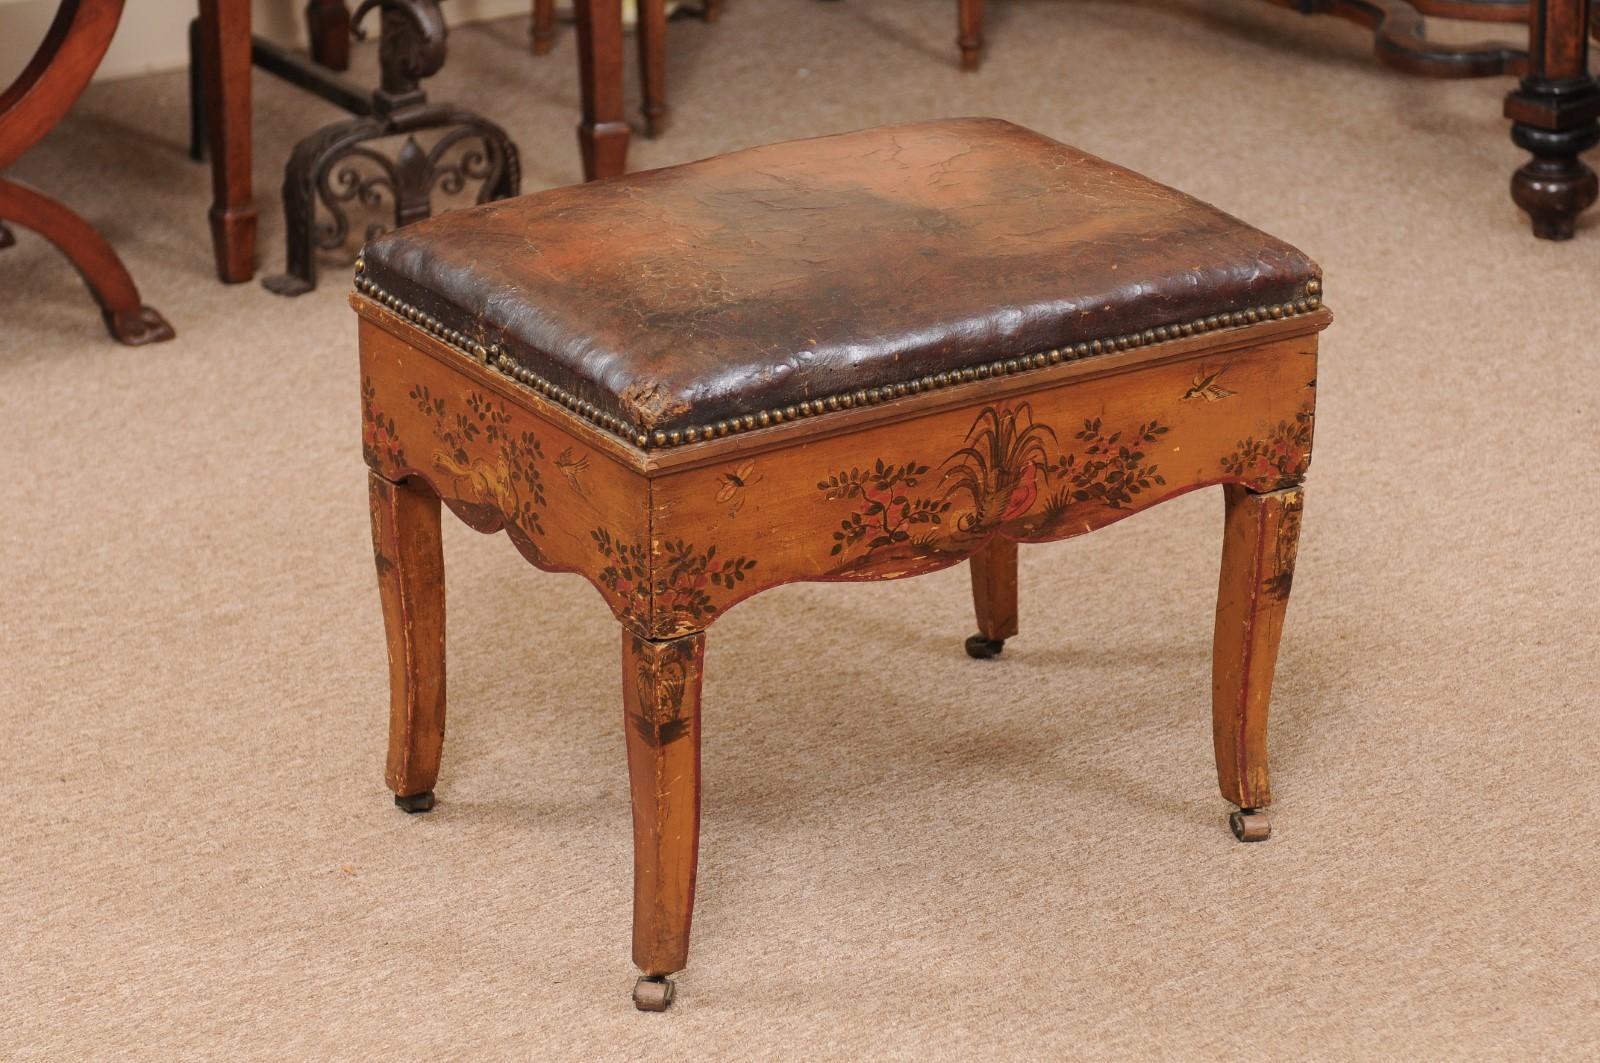 18th Century Italian Stool with Painted Decoration & Leather Upholstered Seat 5